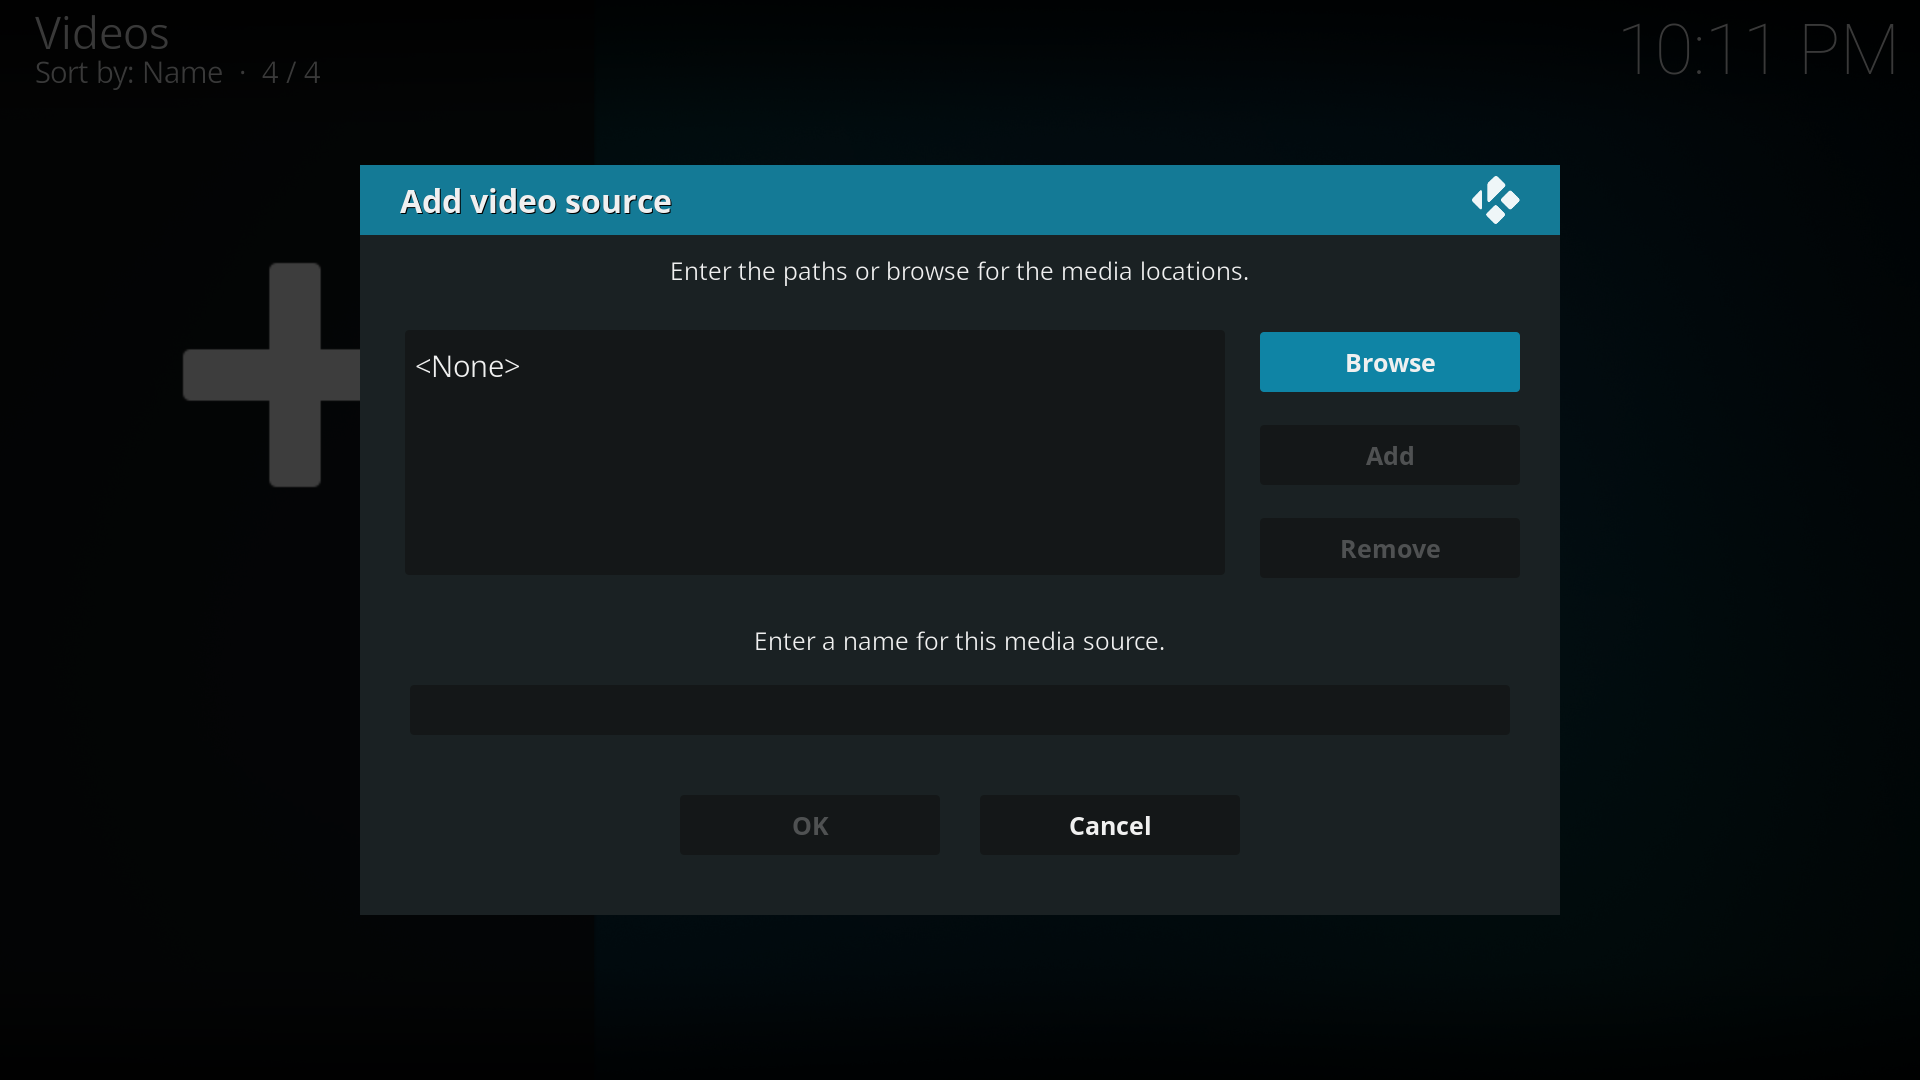 Step 3: The "Add Video Source" screen will be displayed. Then click the "Browse" button.